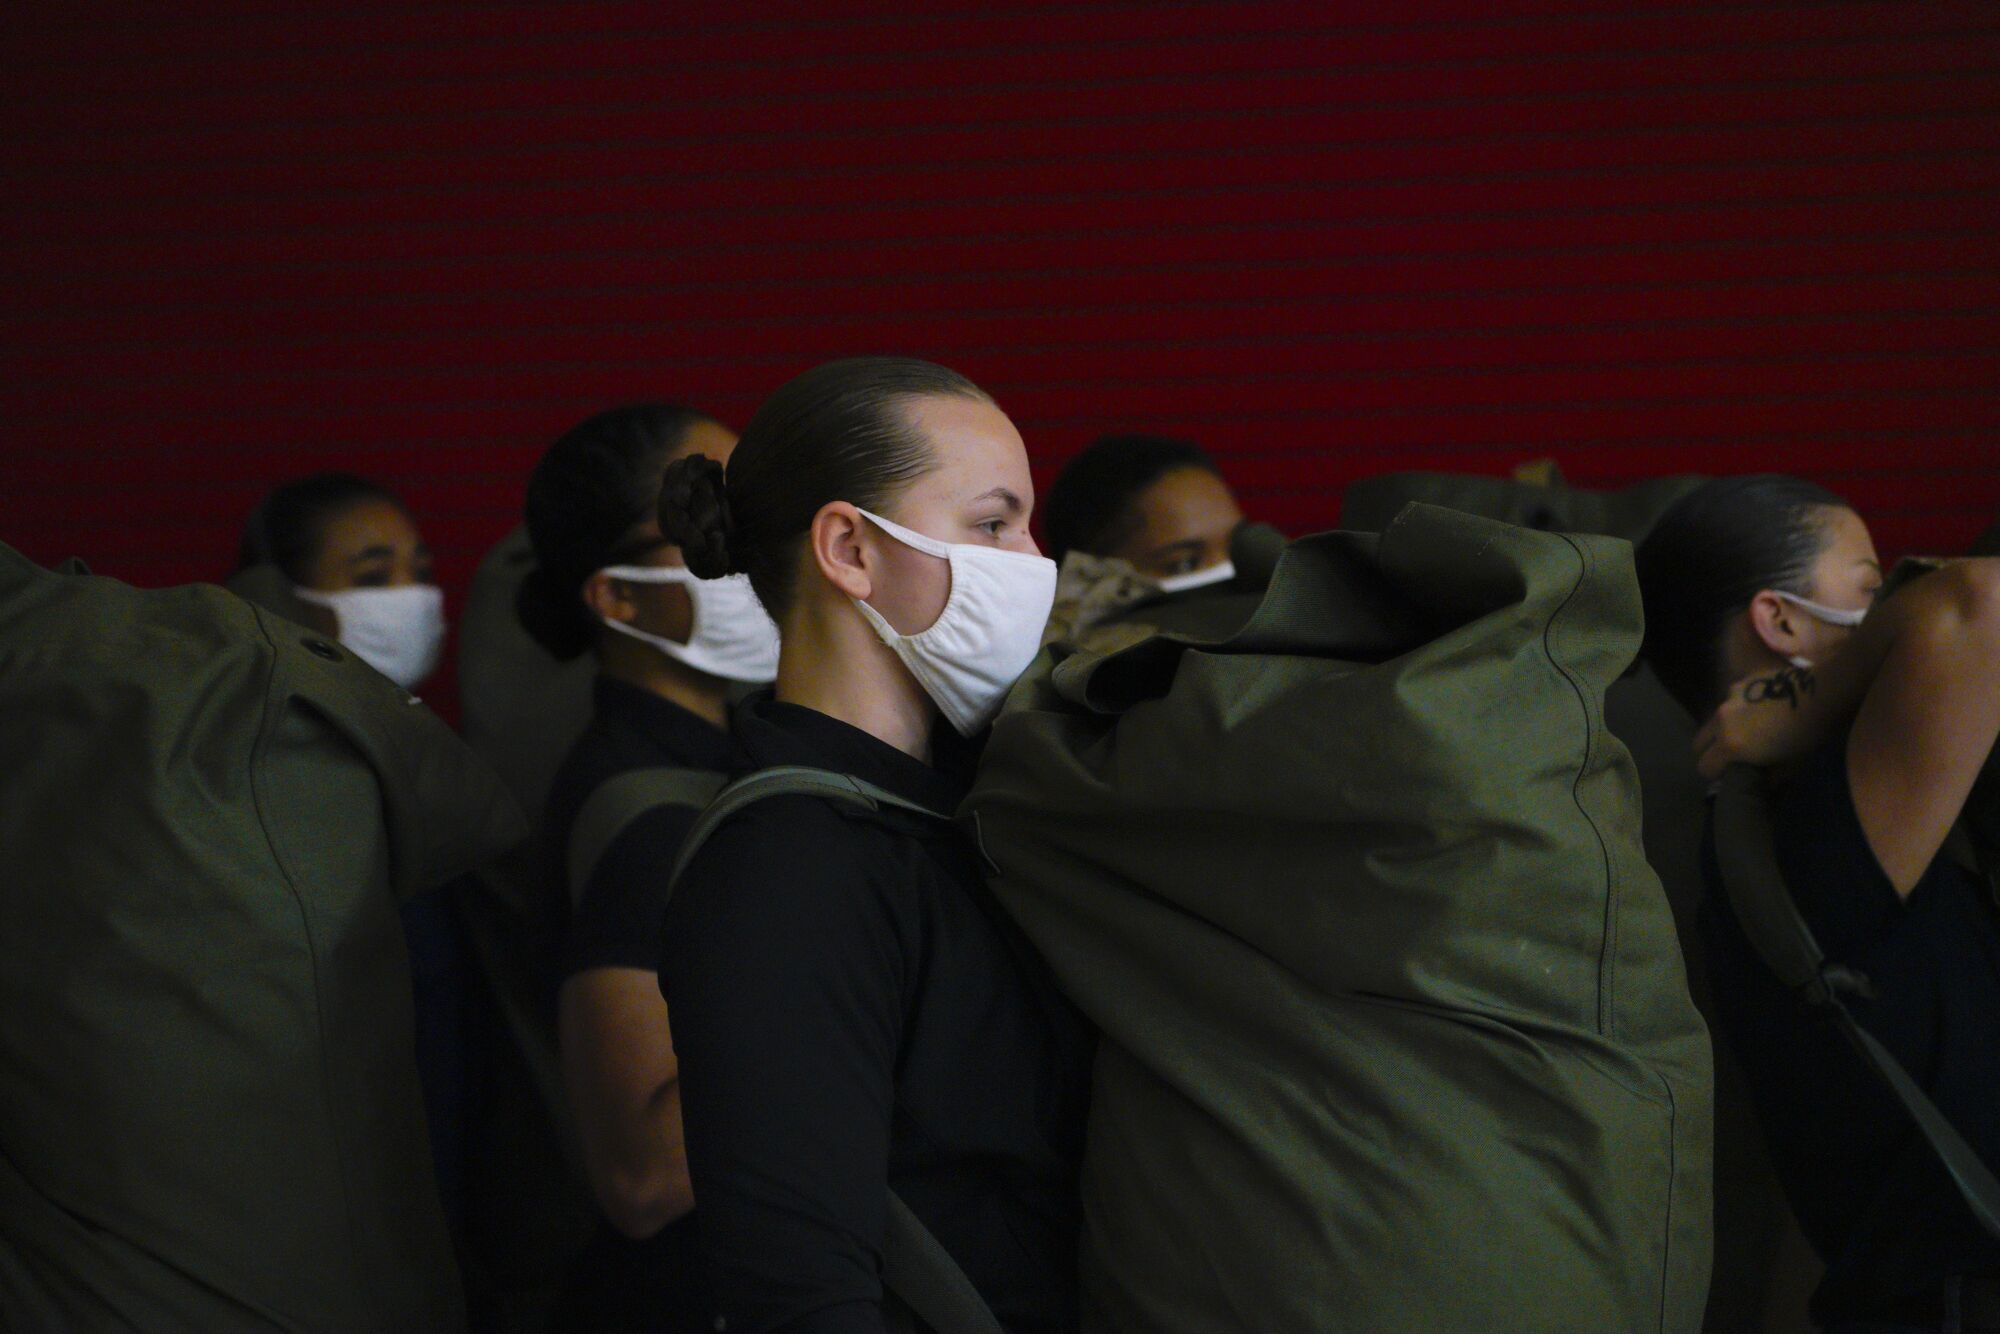 Recruits carry their seabags and await their next orders during their processing for their first day of boot camp.